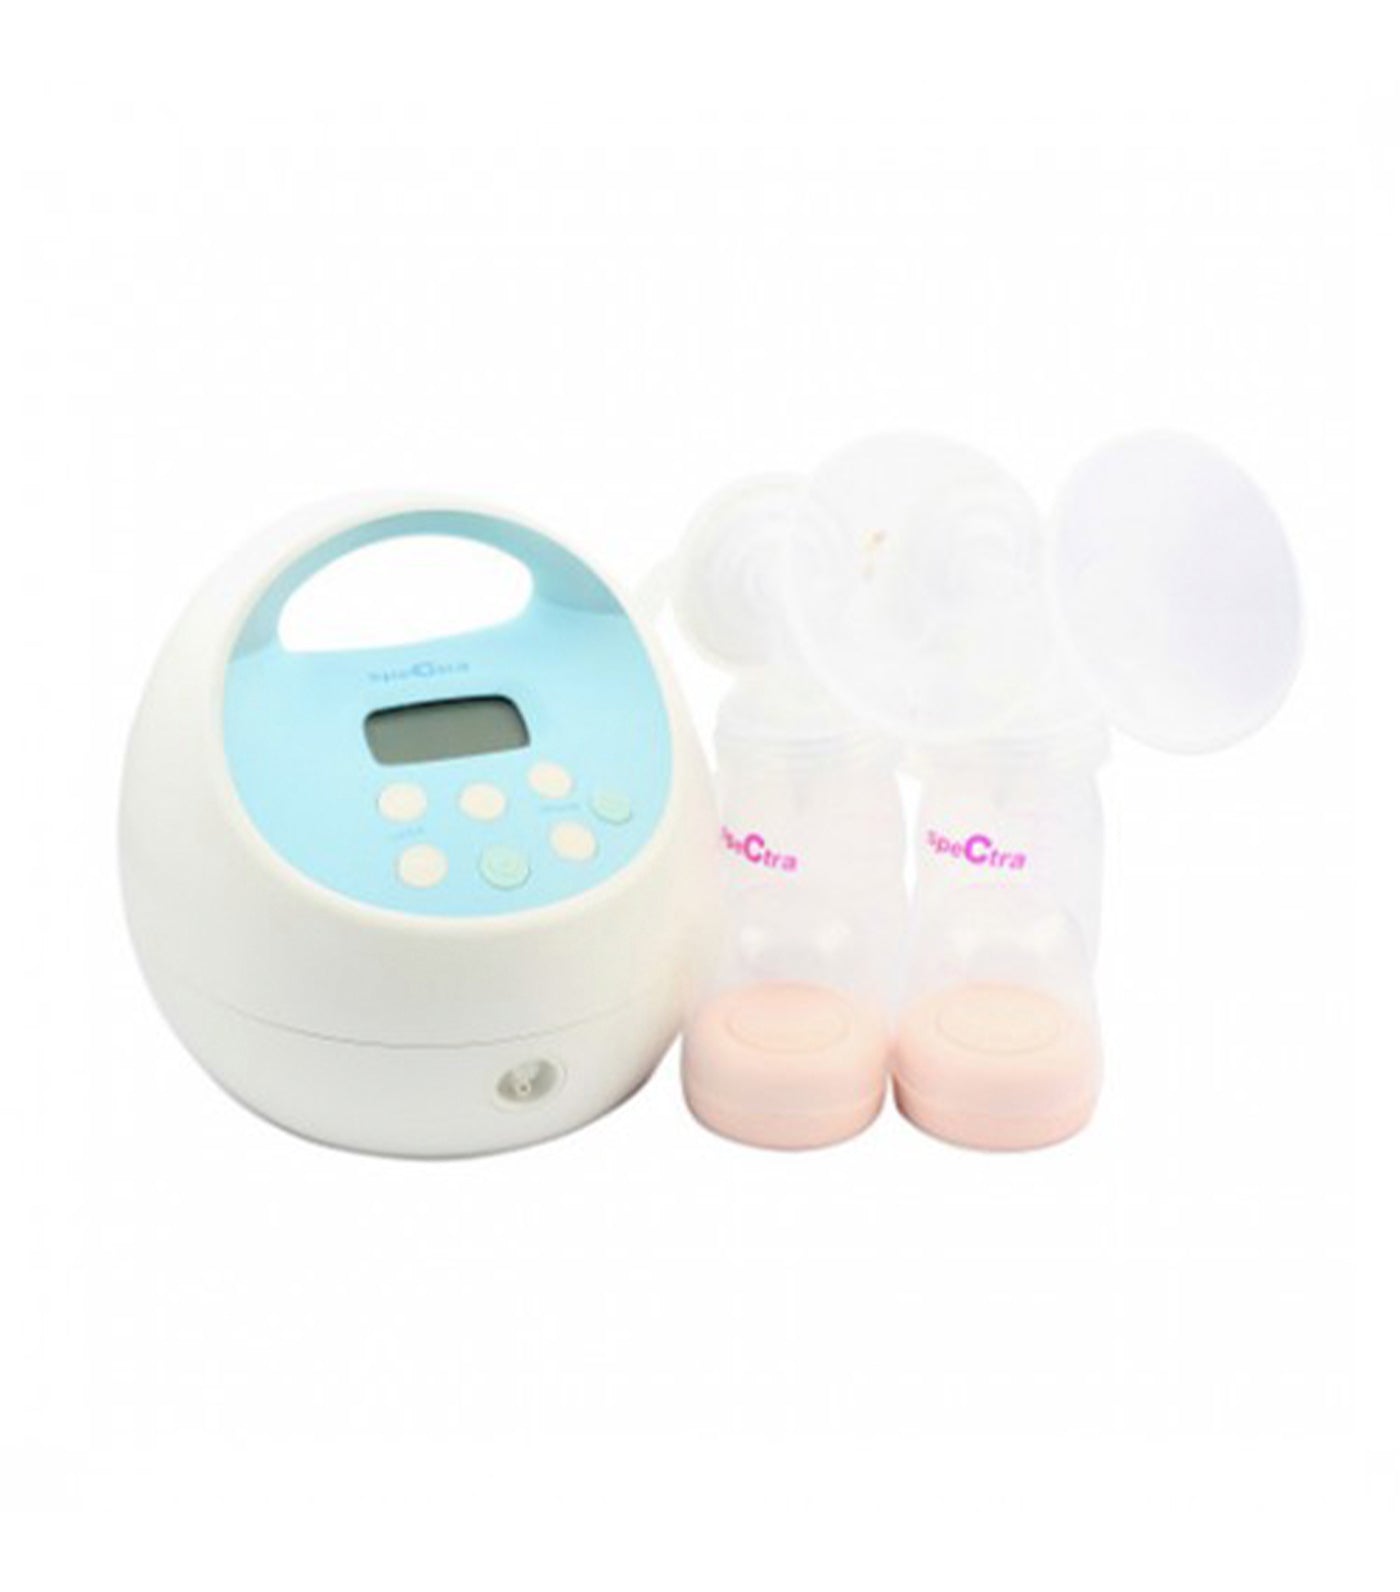 S1 Plus Hospital Grade Double Electric Rechargeable Breast Pump - Blue